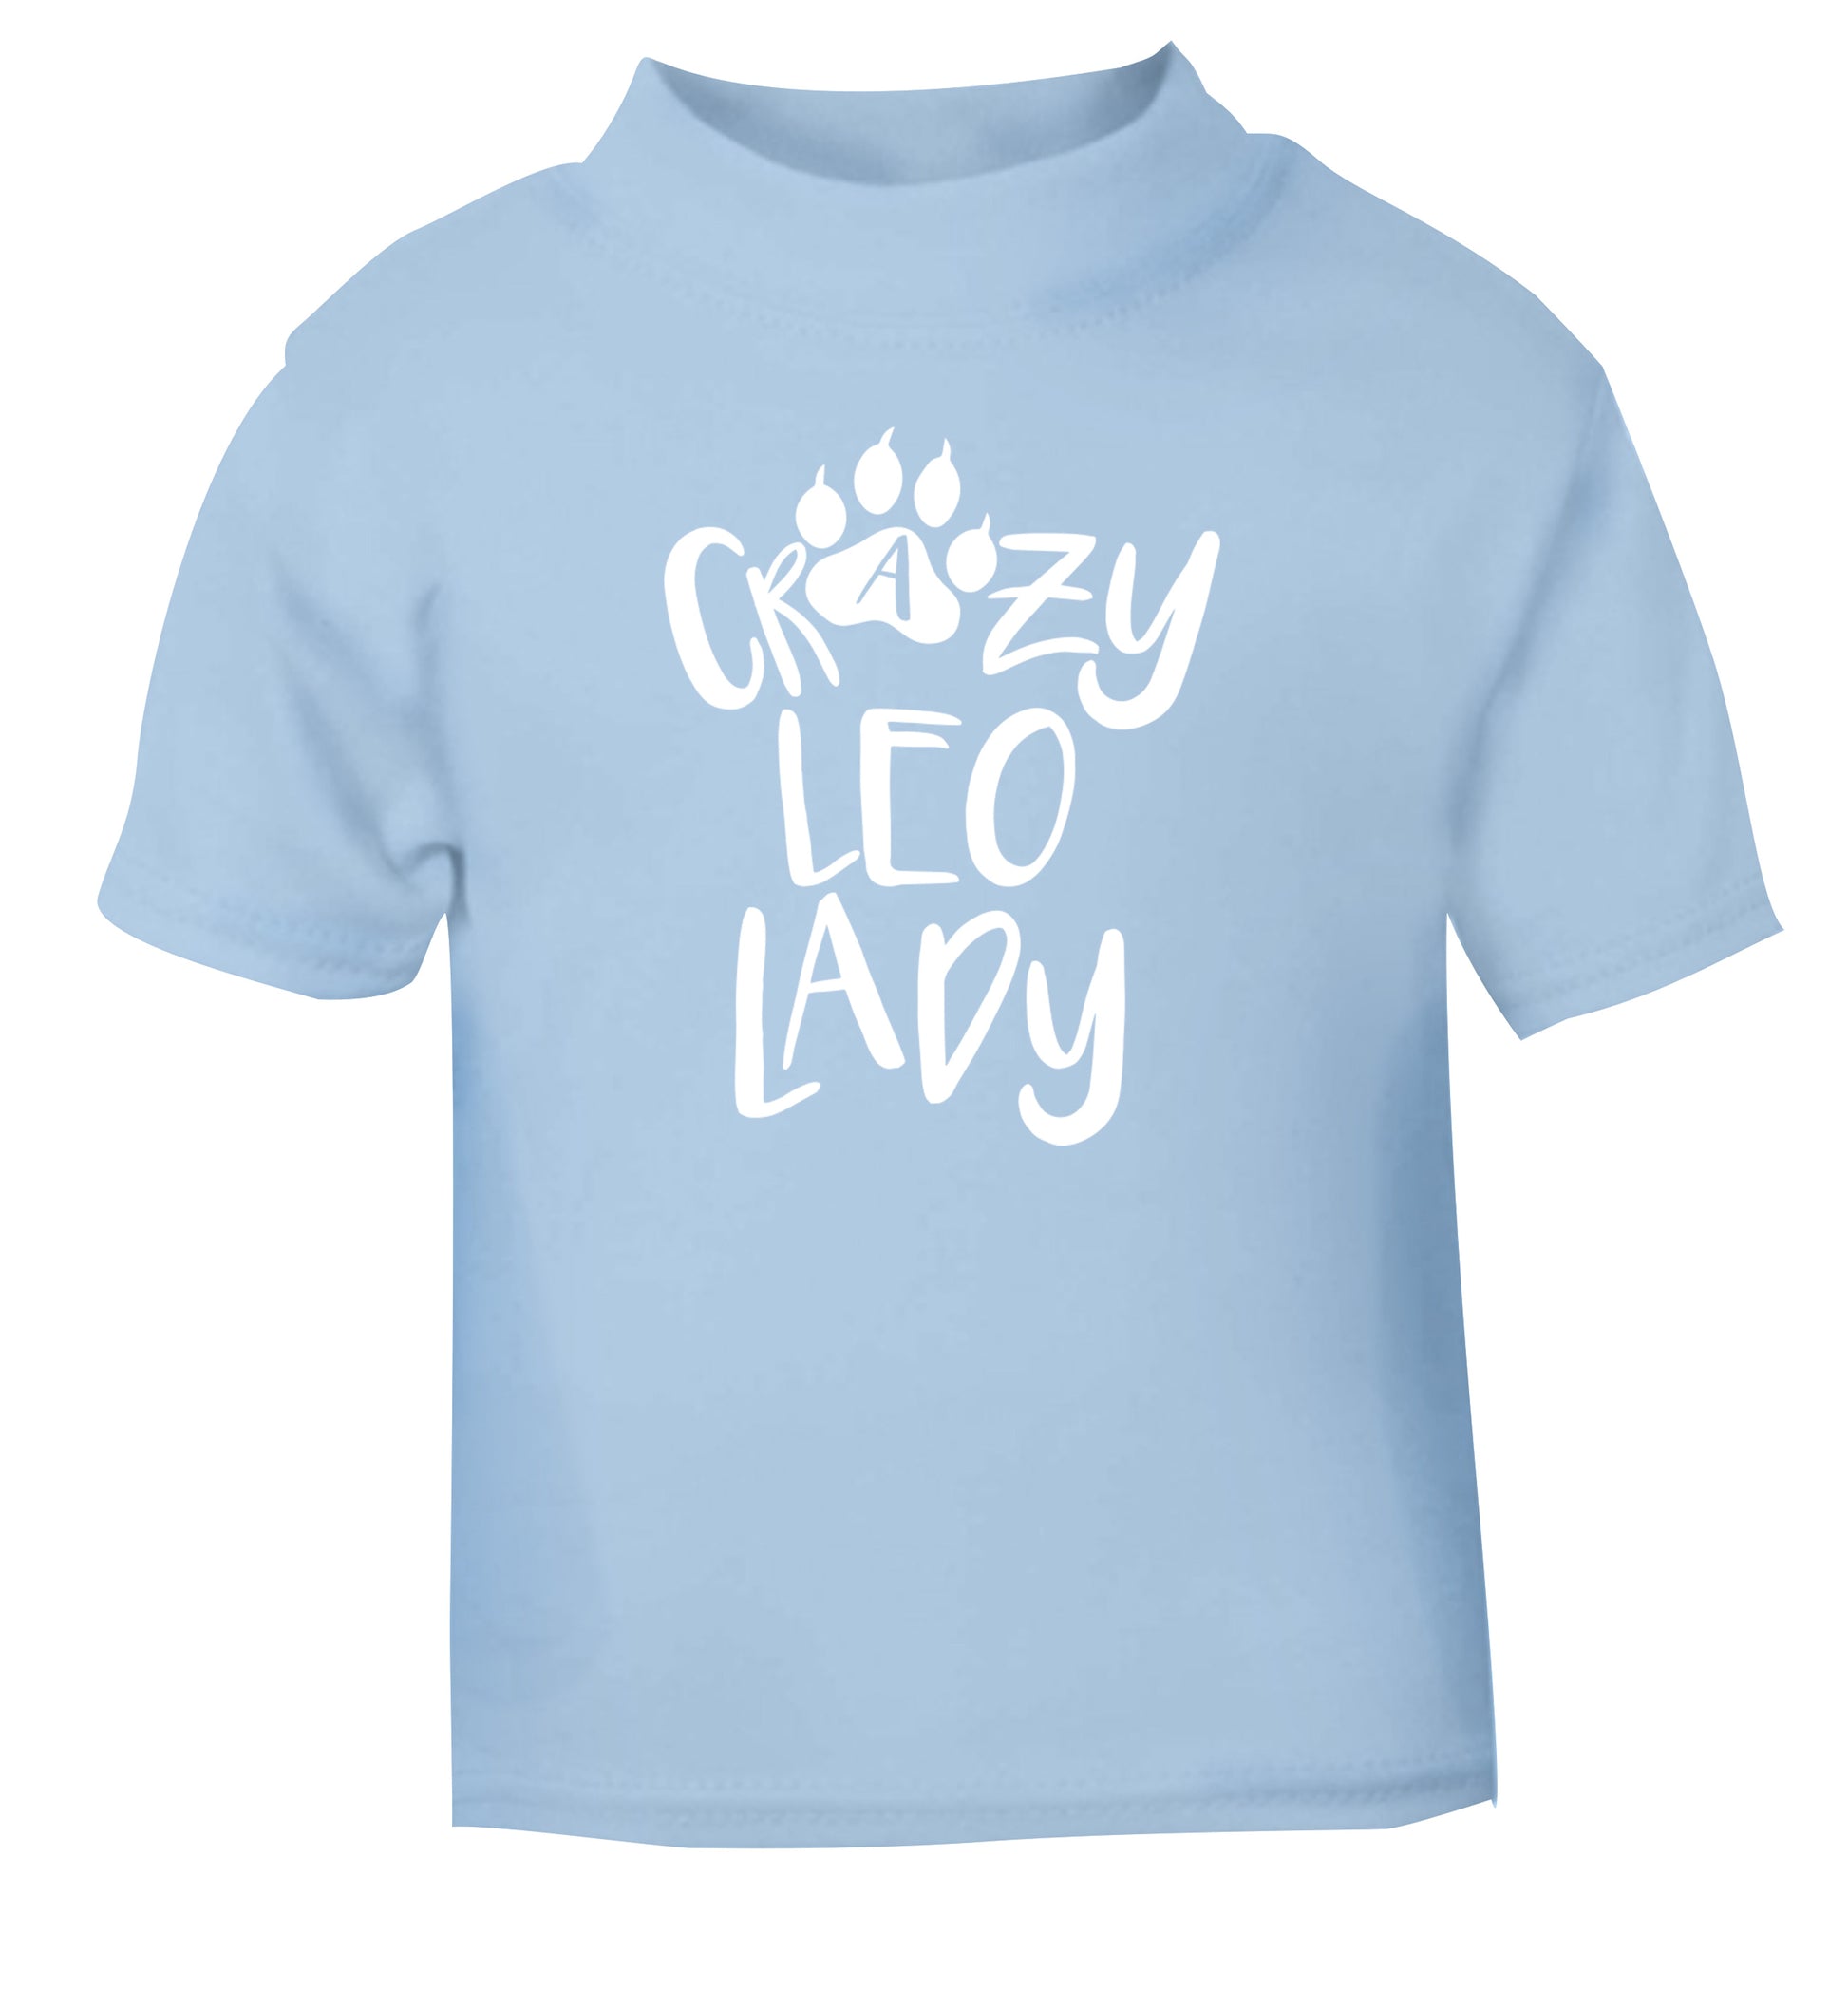 Crazy leo lady light blue Baby Toddler Tshirt 2 Years